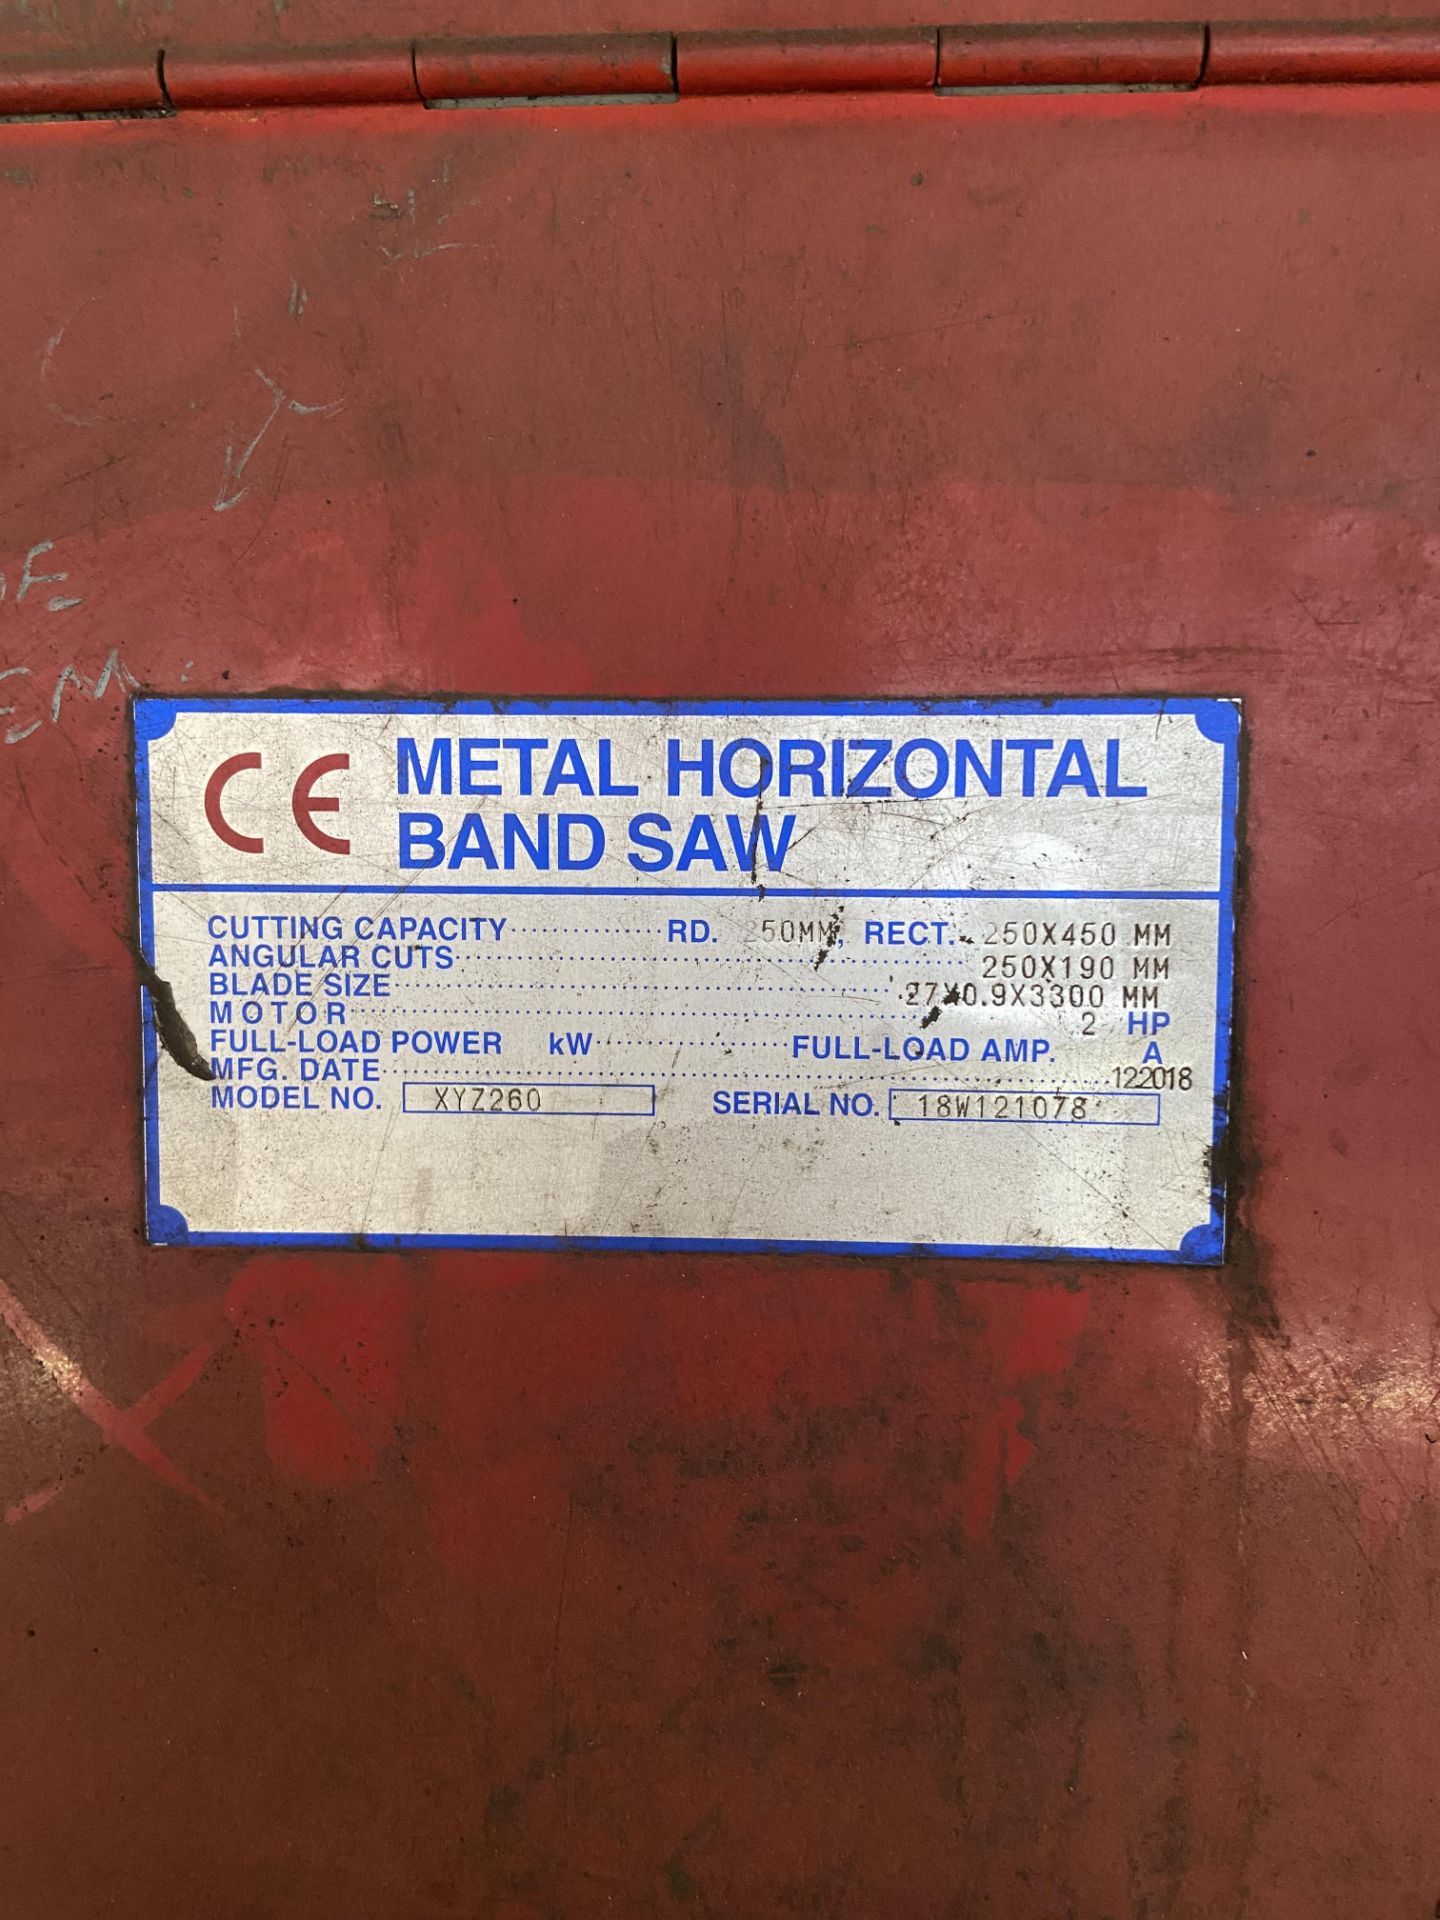 XYZ 260 Horizontal Metal Bandsaw, serial no. 18W121078.  Being sold provisionally, subject to - Image 3 of 6